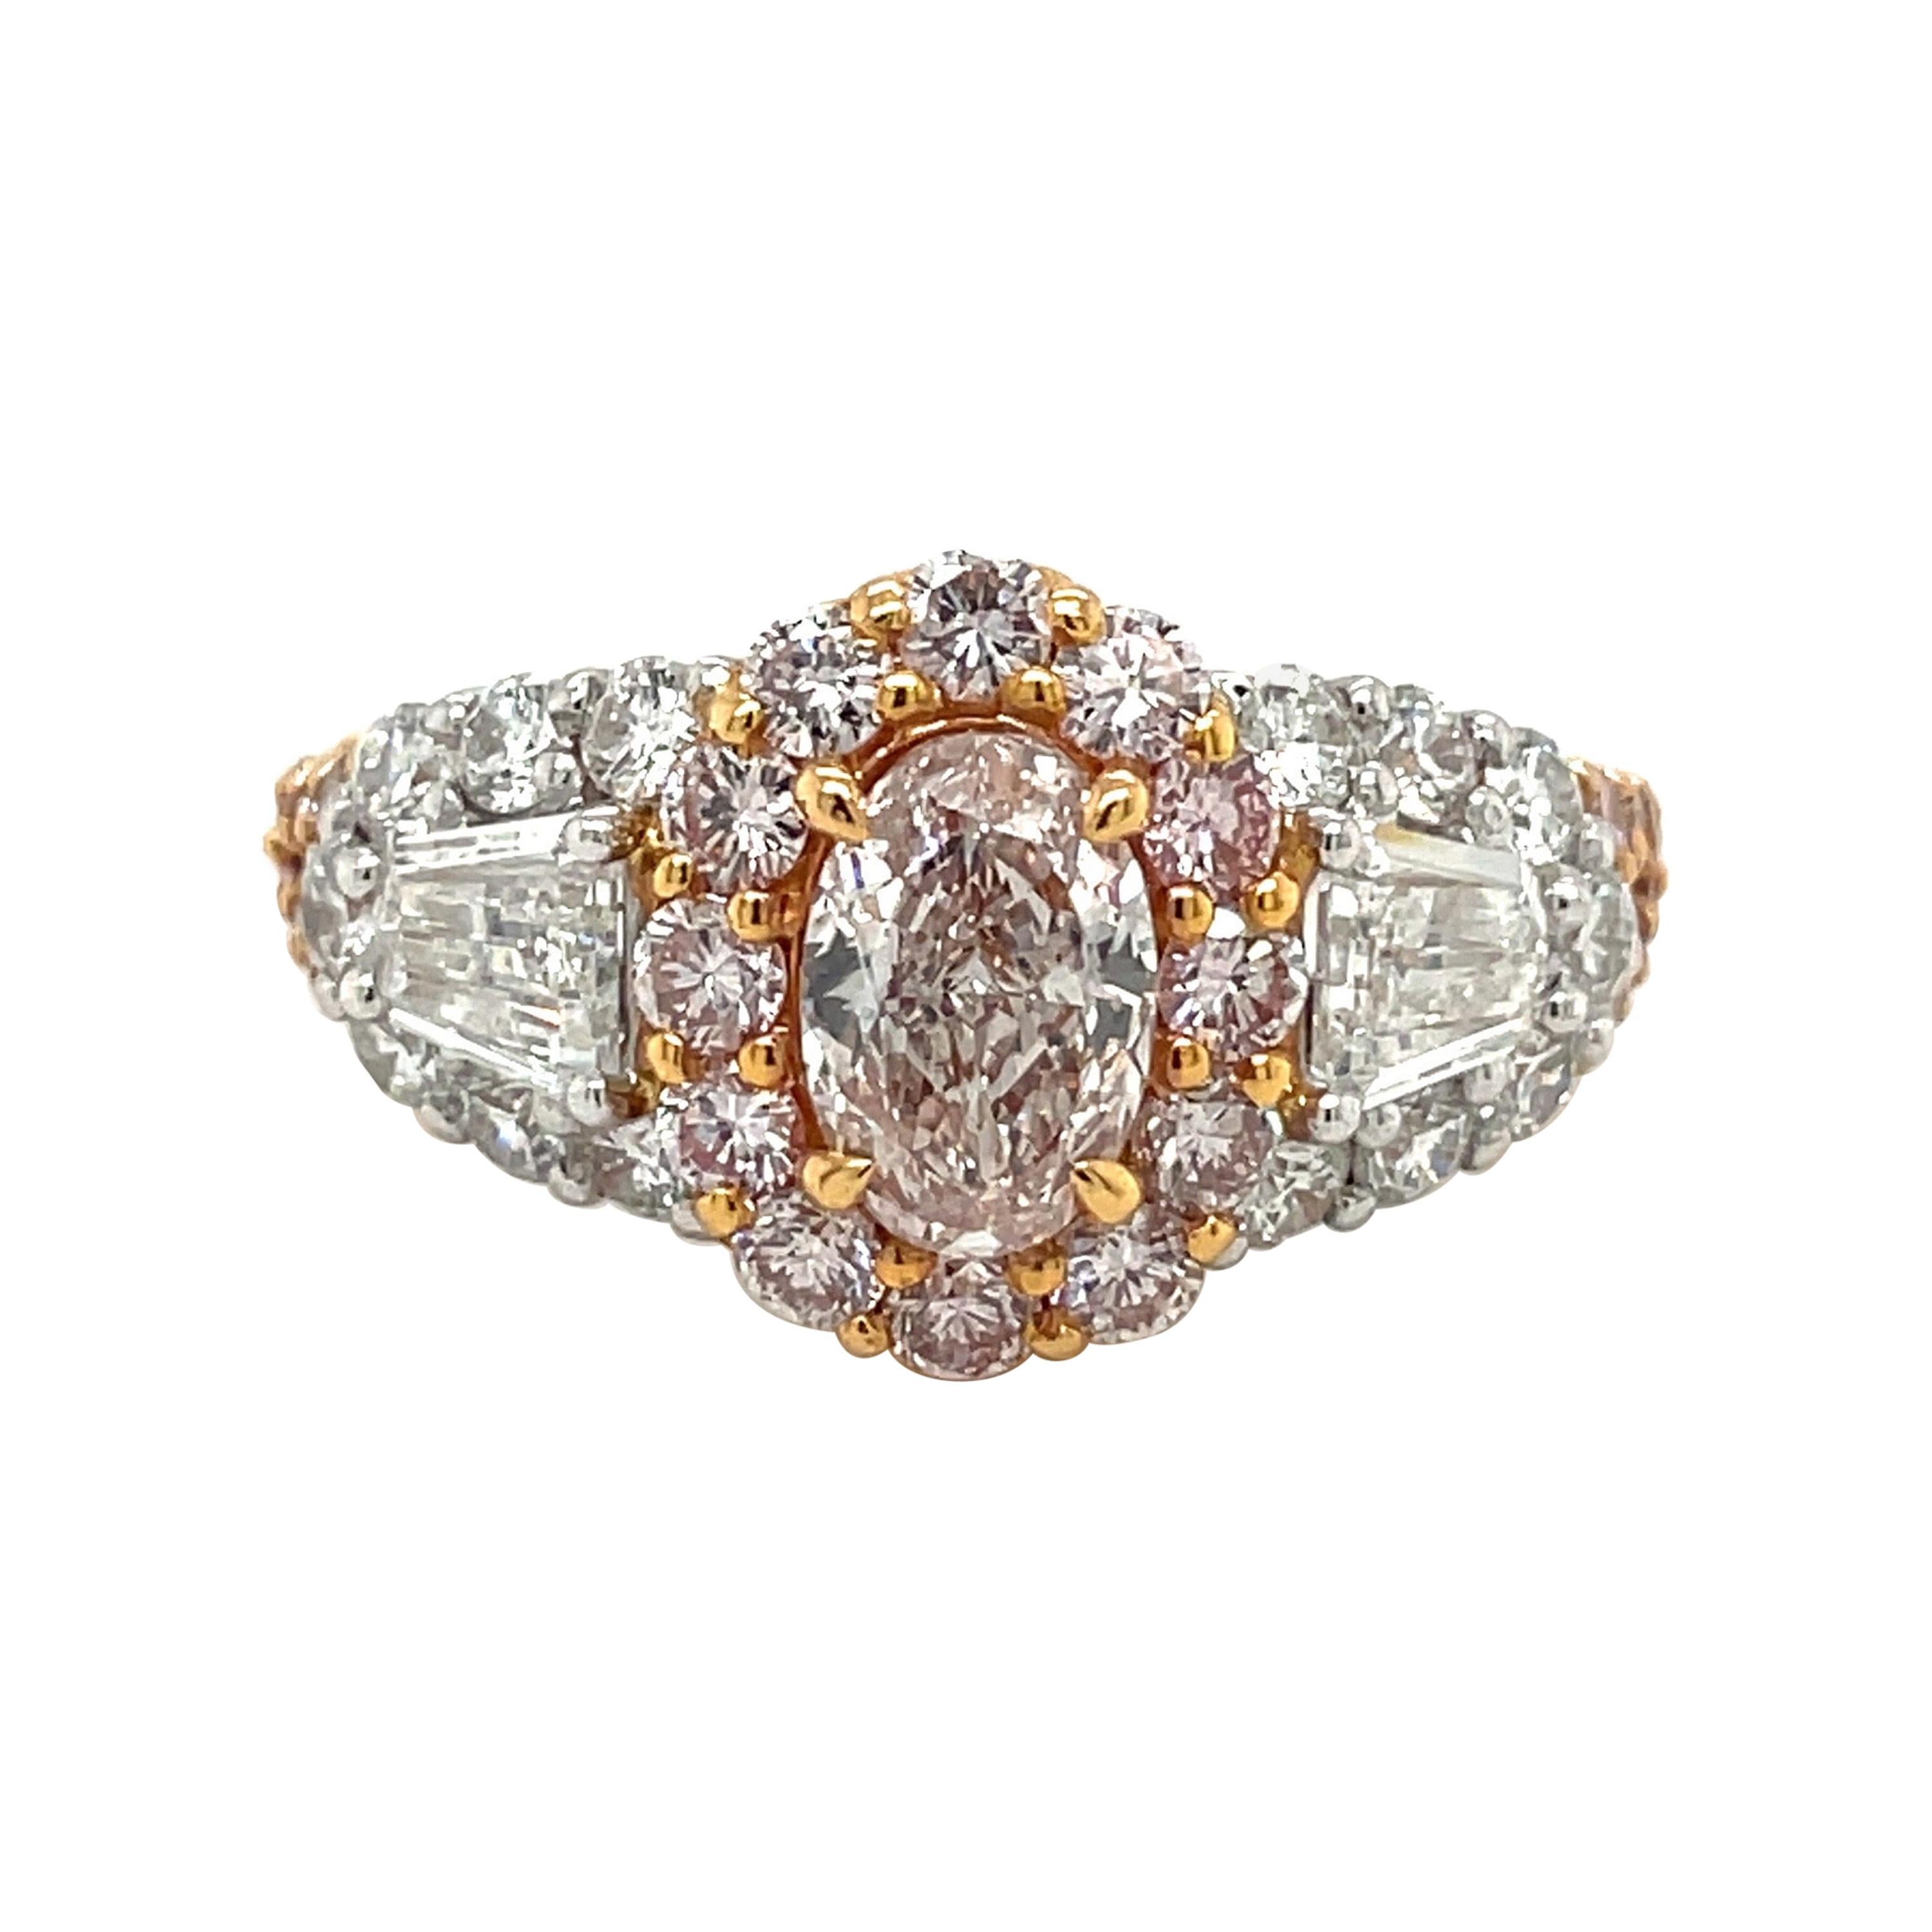 Fancy Light Pink Diamond Ring with White Diamonds Set in Rose Gold and Platinum